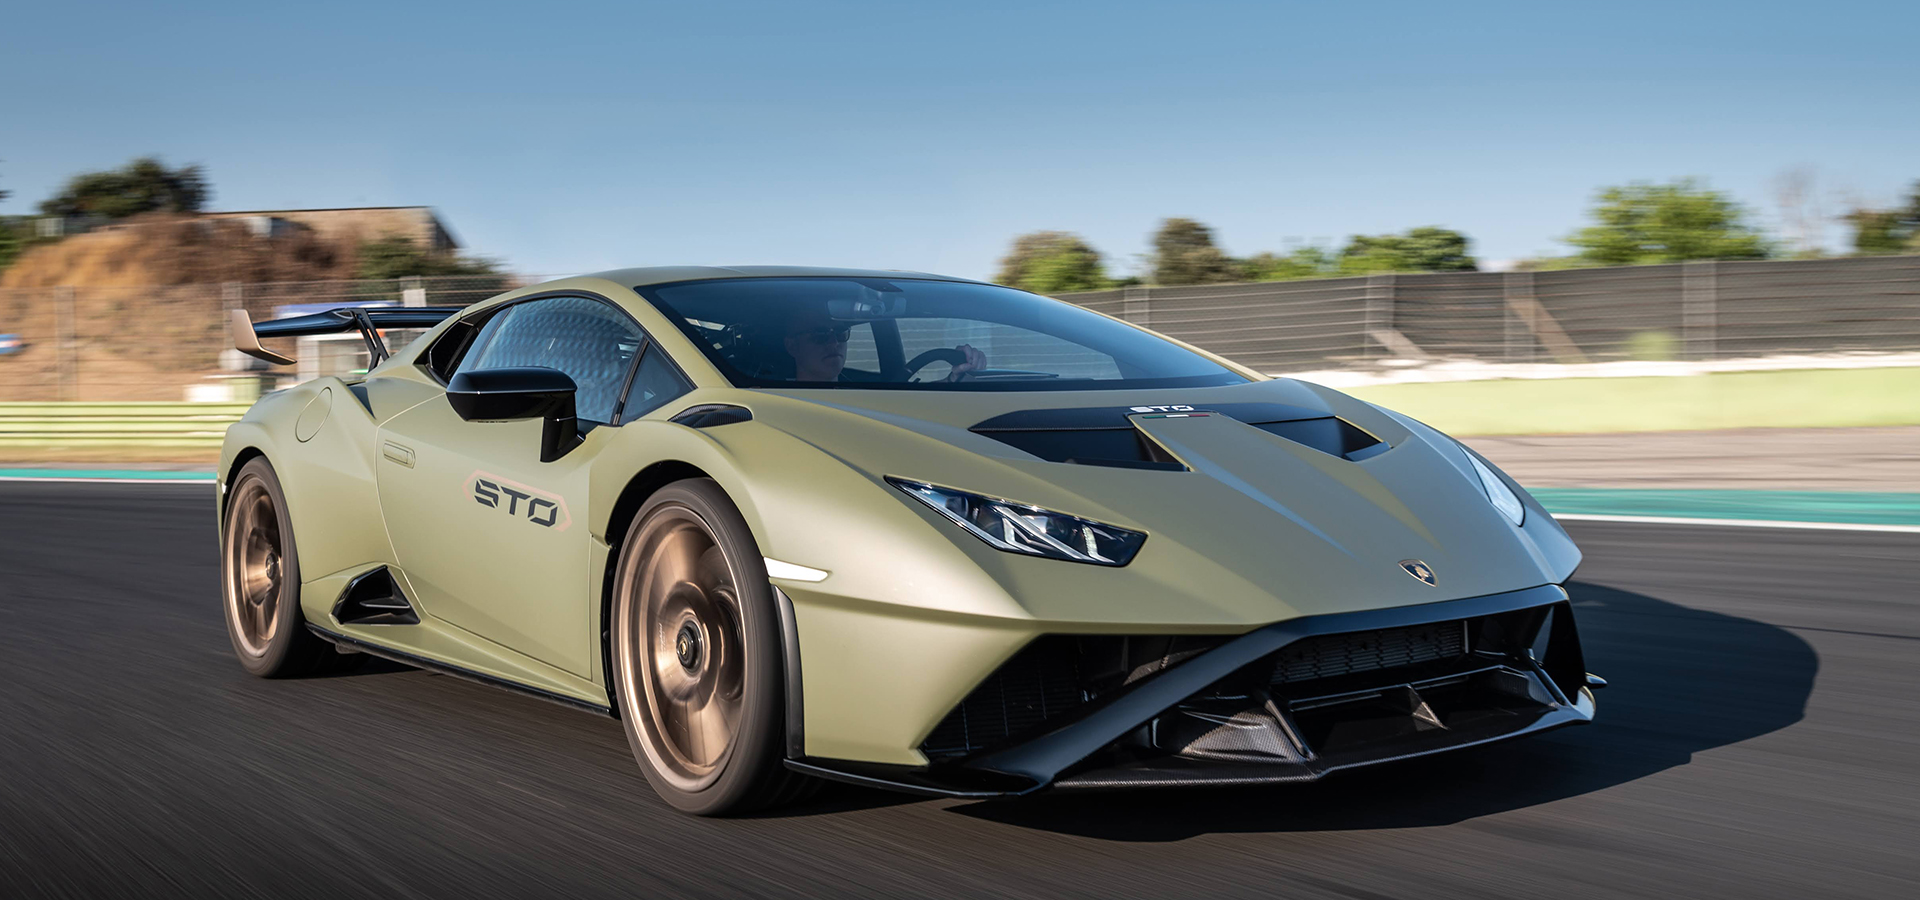 Everything you need to know about the Lamborghini Huracán STO